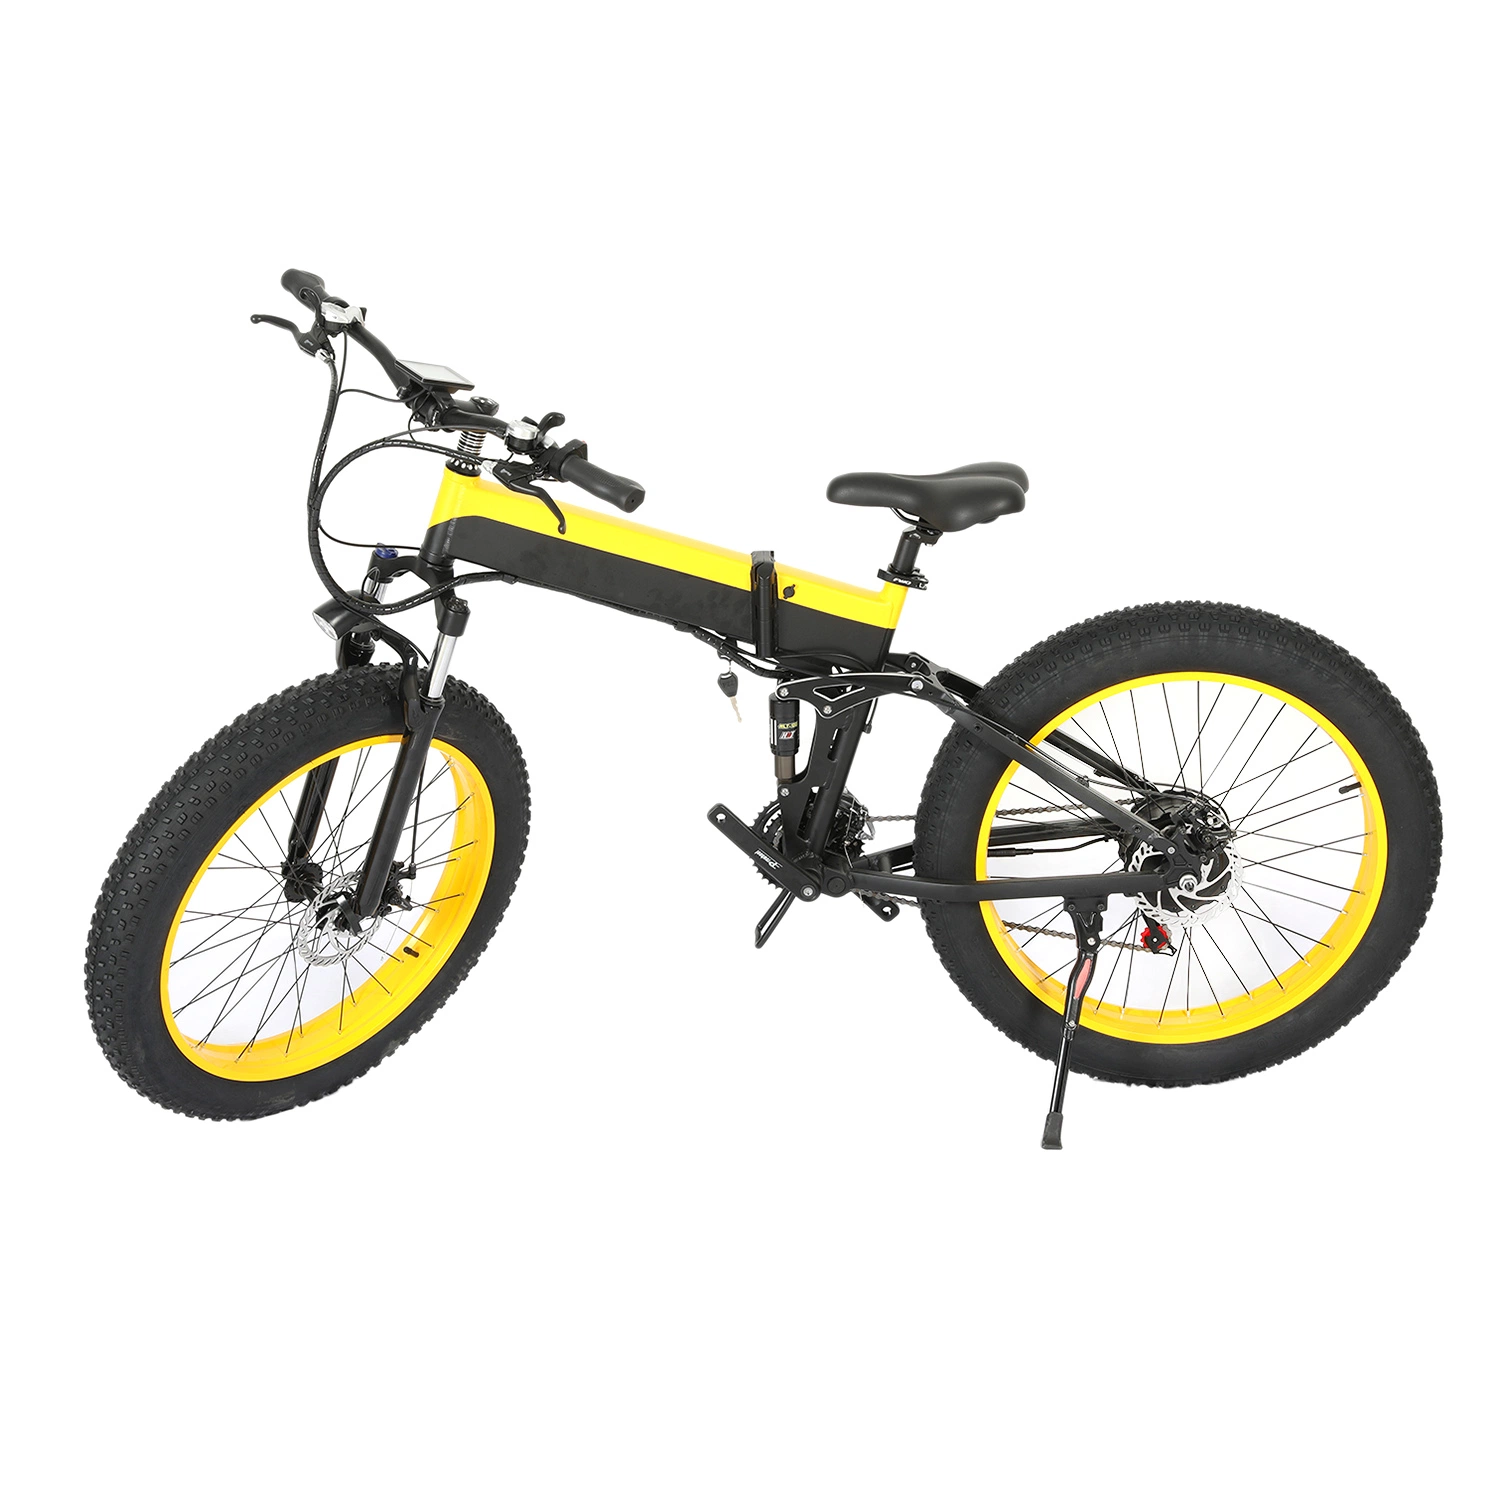 26inch Light Folding Bike Electric City Bicycle Electric Mountain Bike Vehicle Bicycle with 500W Brushless Motor 36V 7.8ah Battery LCD Displayer Dirt Bike